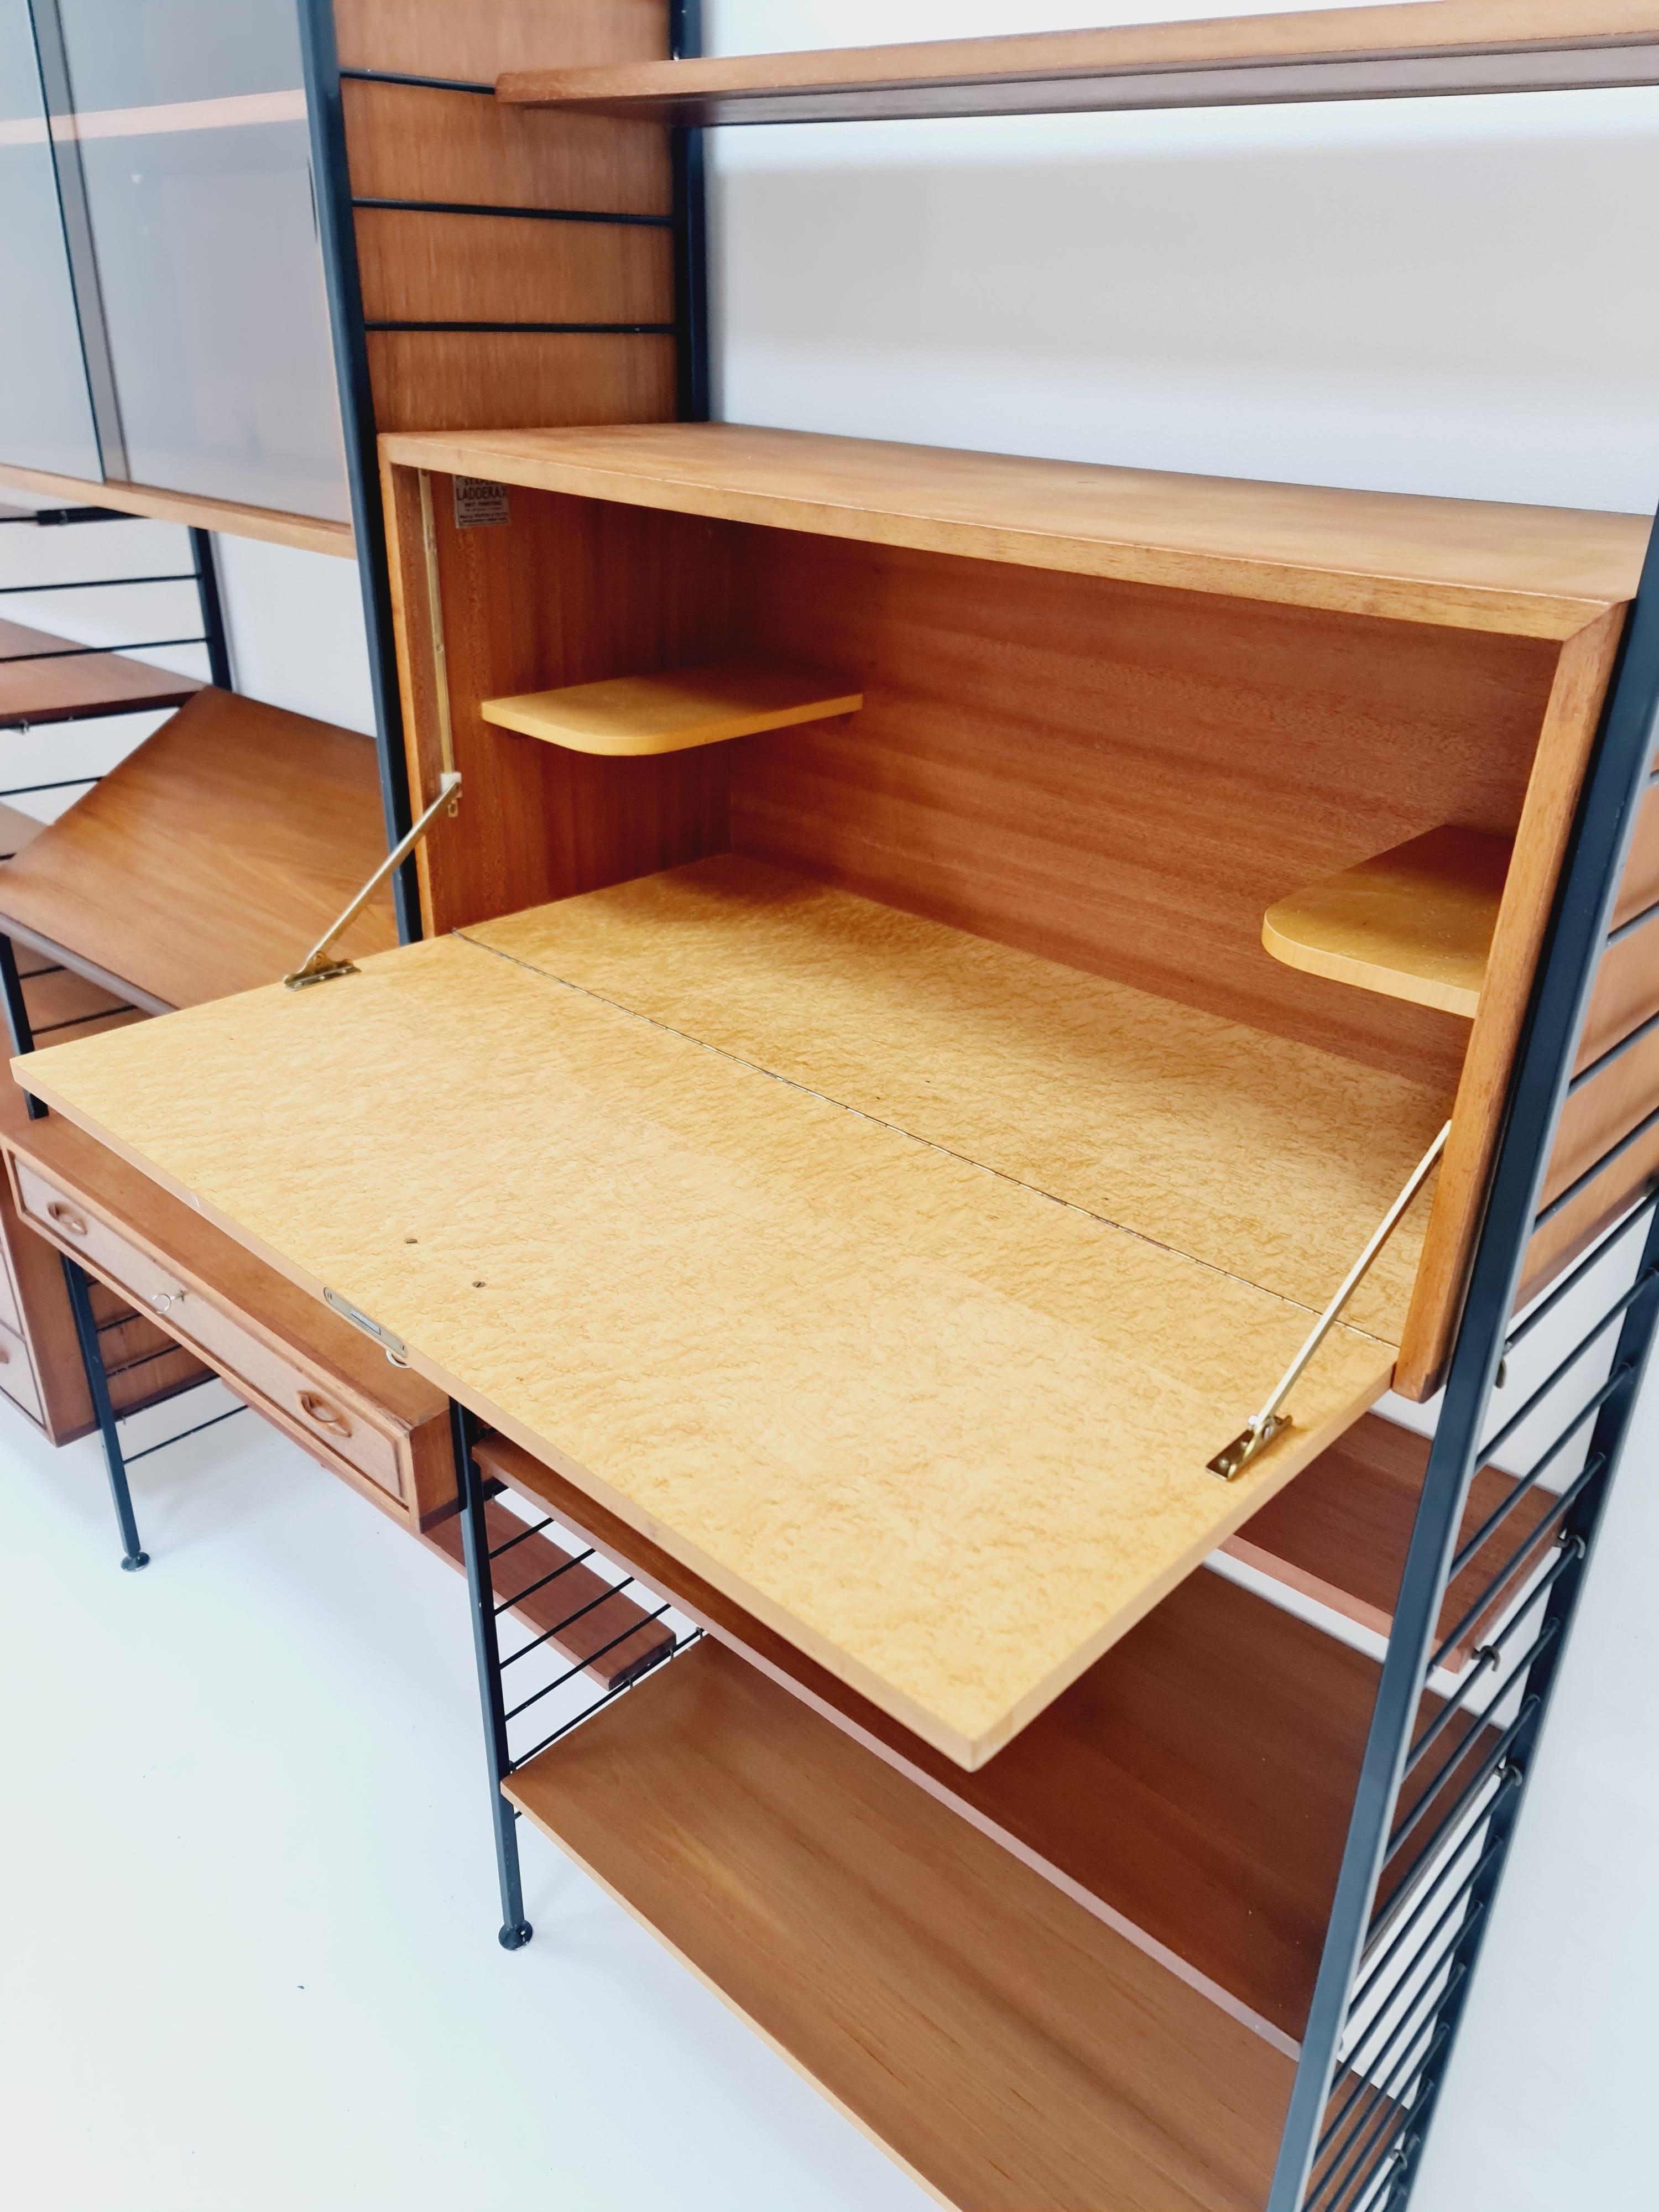 Free standing Mid century modular unit shelving system by Staples Ladderax 2